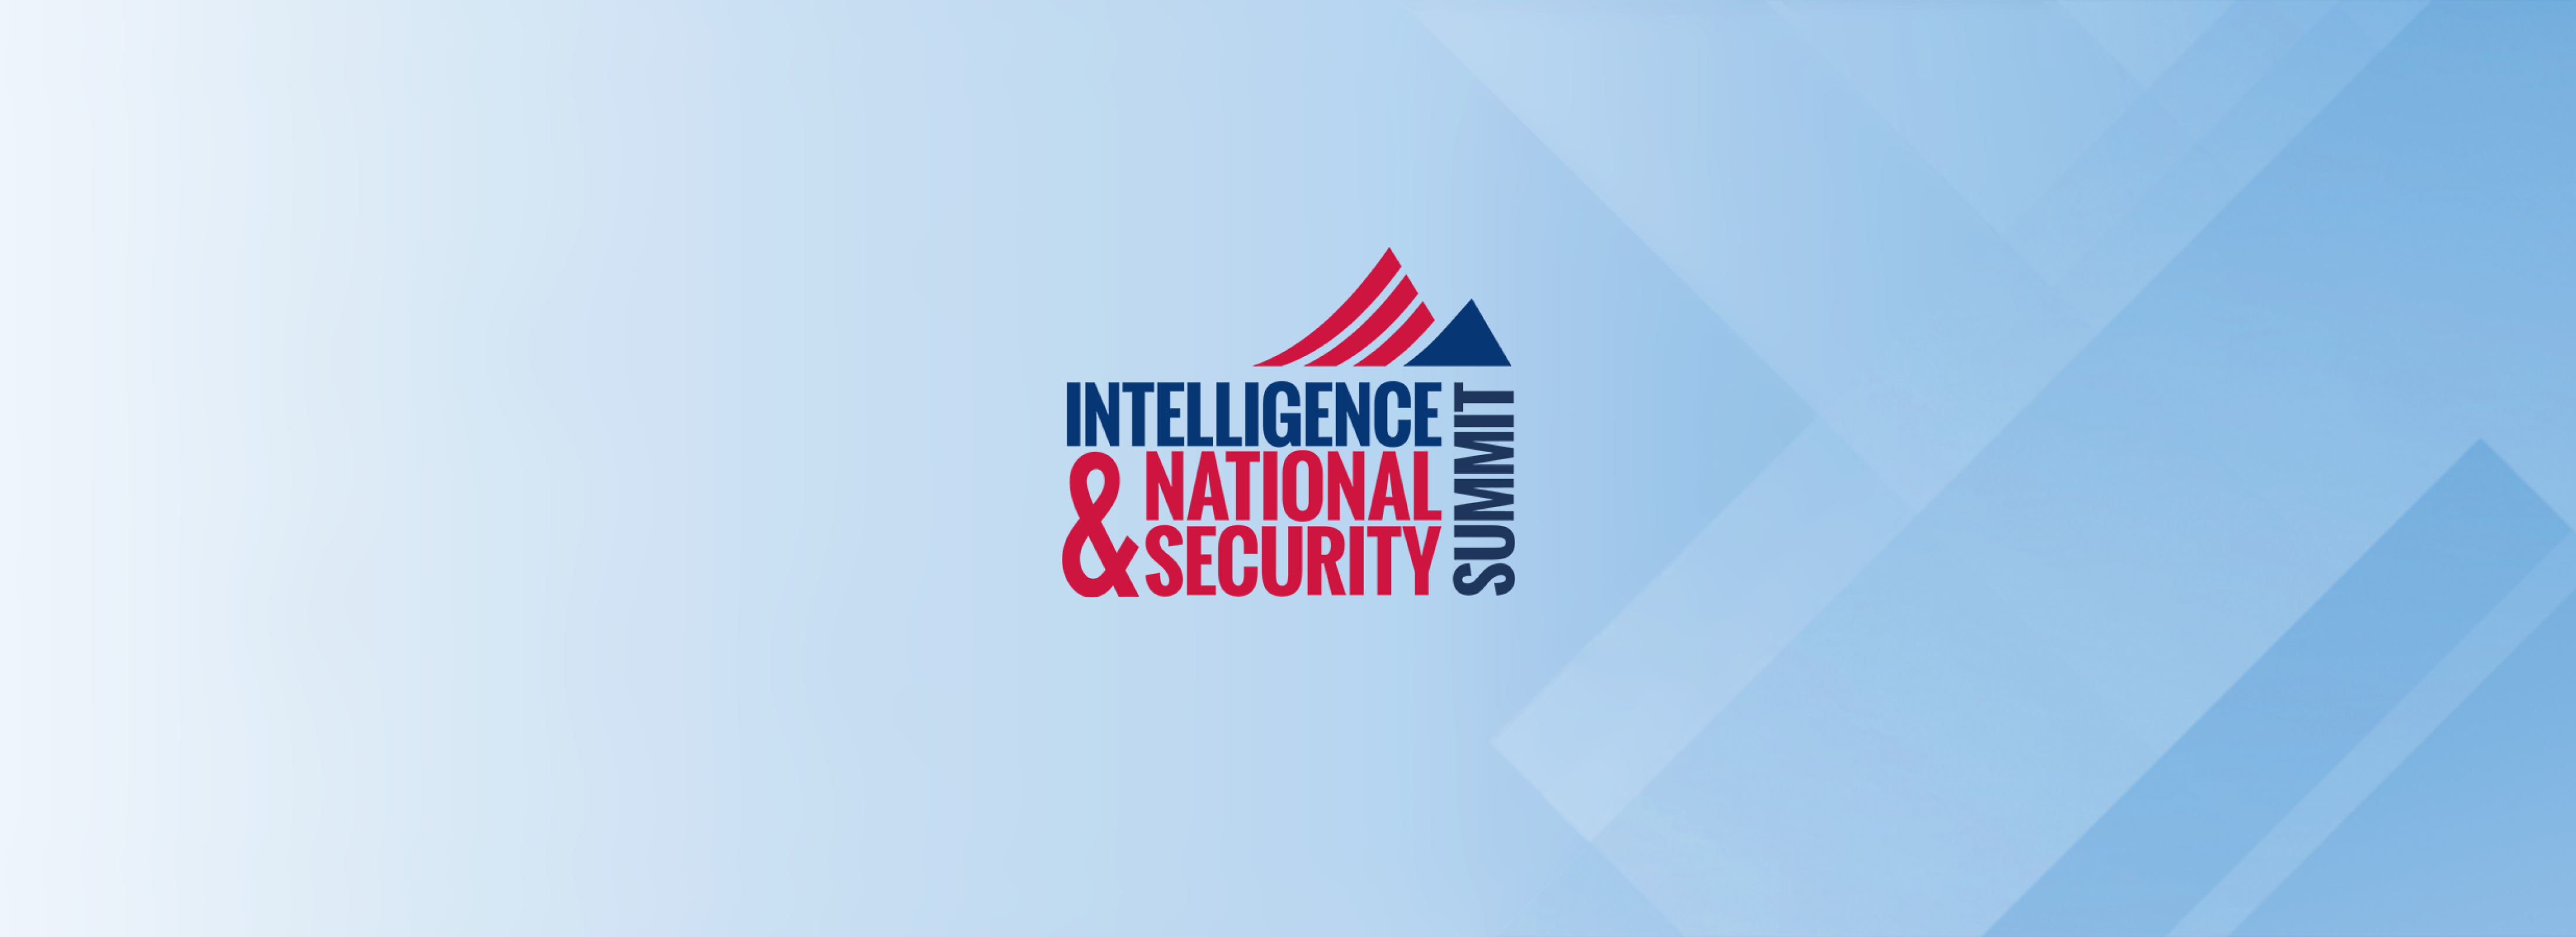 Exhibitor at the 2016 Intelligence & National Security Summit